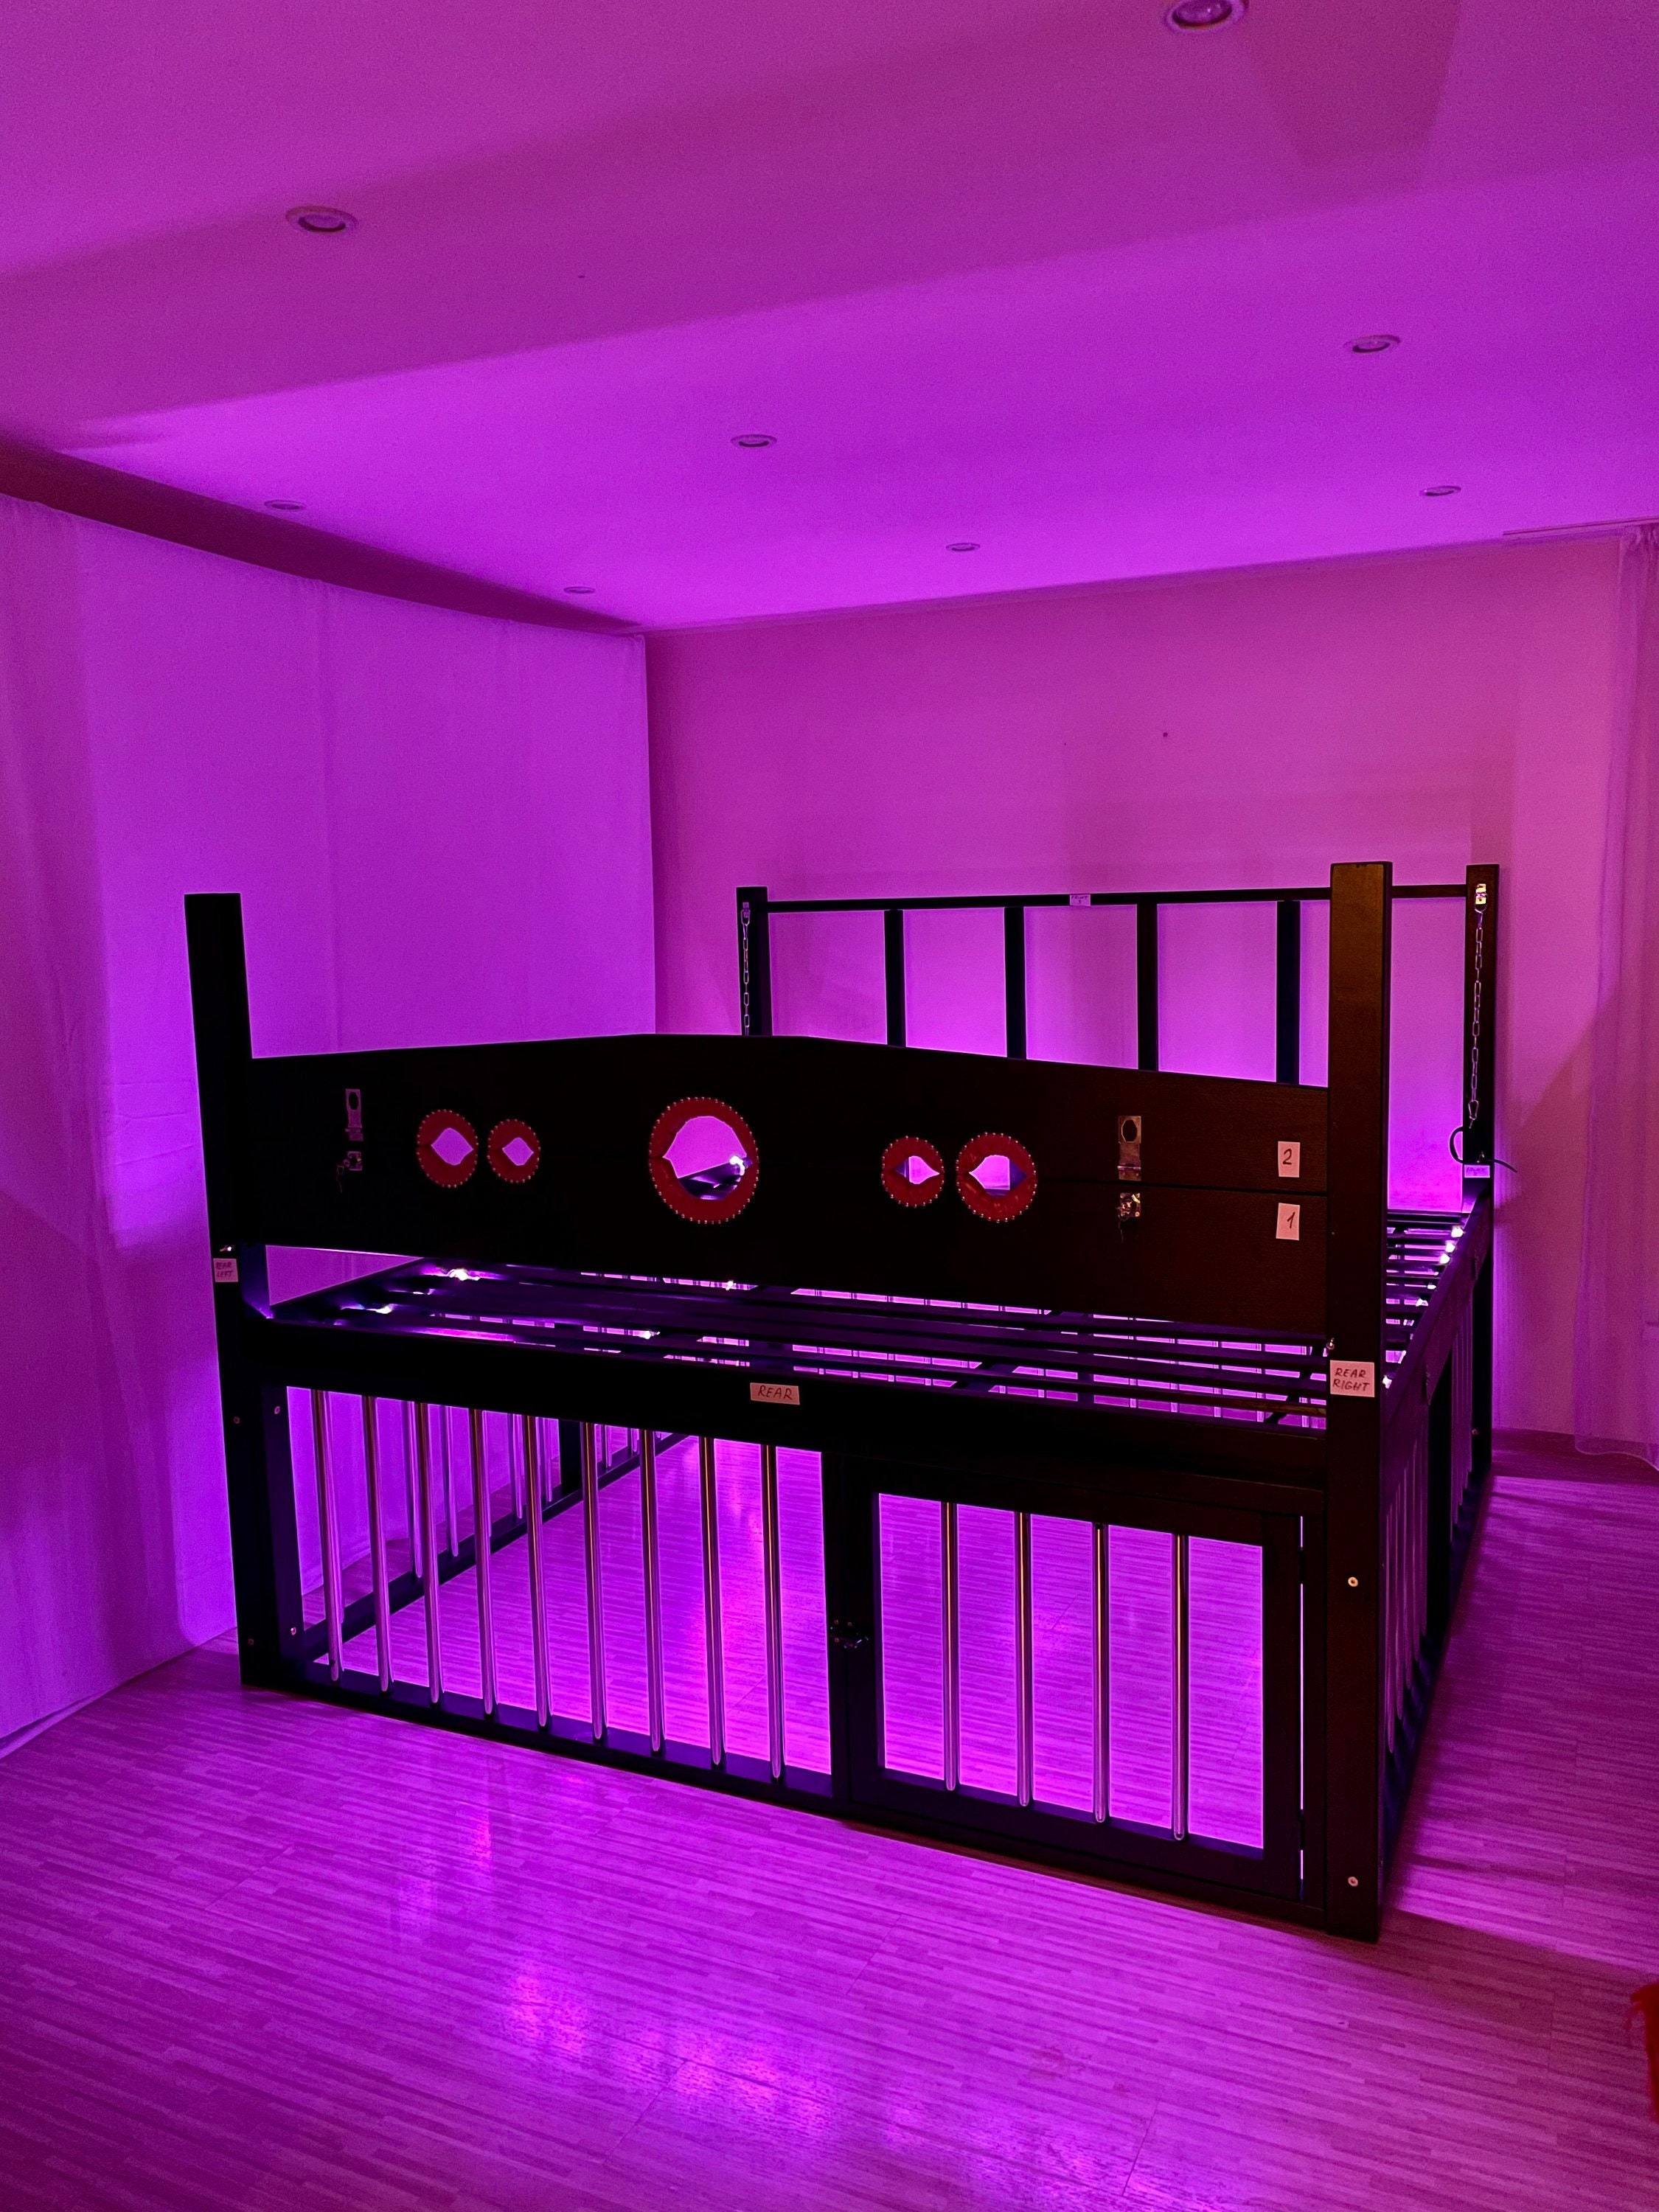 Bondage Bed With Cage and Light Bedroom Fetish Bed Fetish Toys